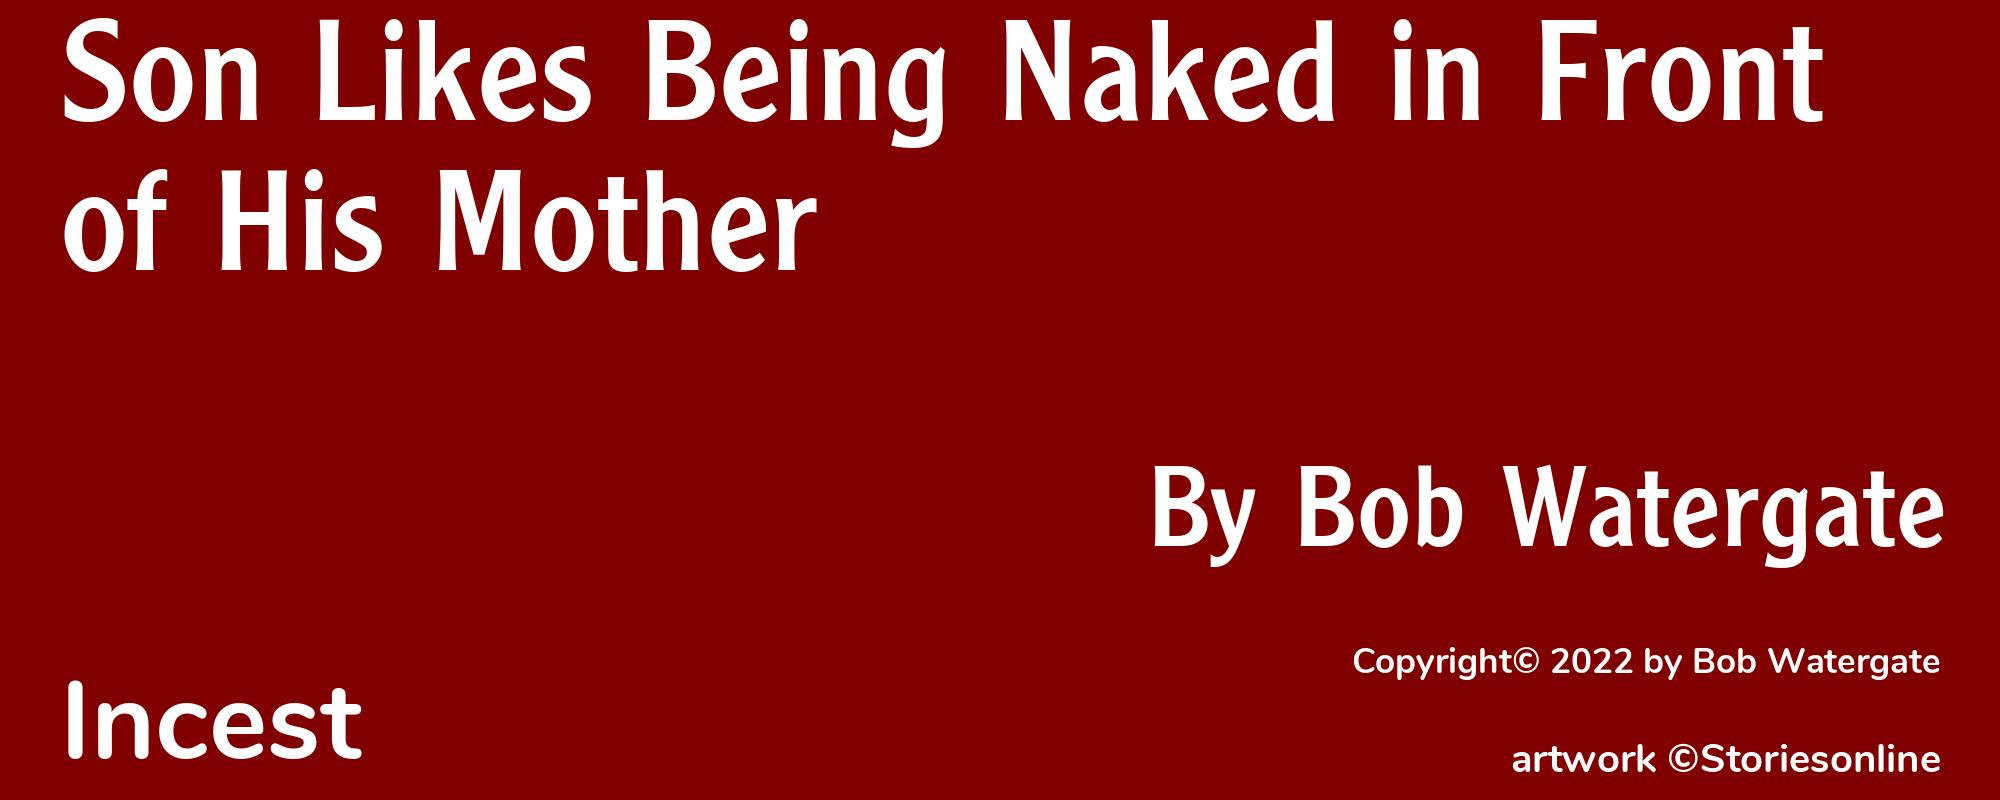 Son Likes Being Naked in Front of His Mother - Cover